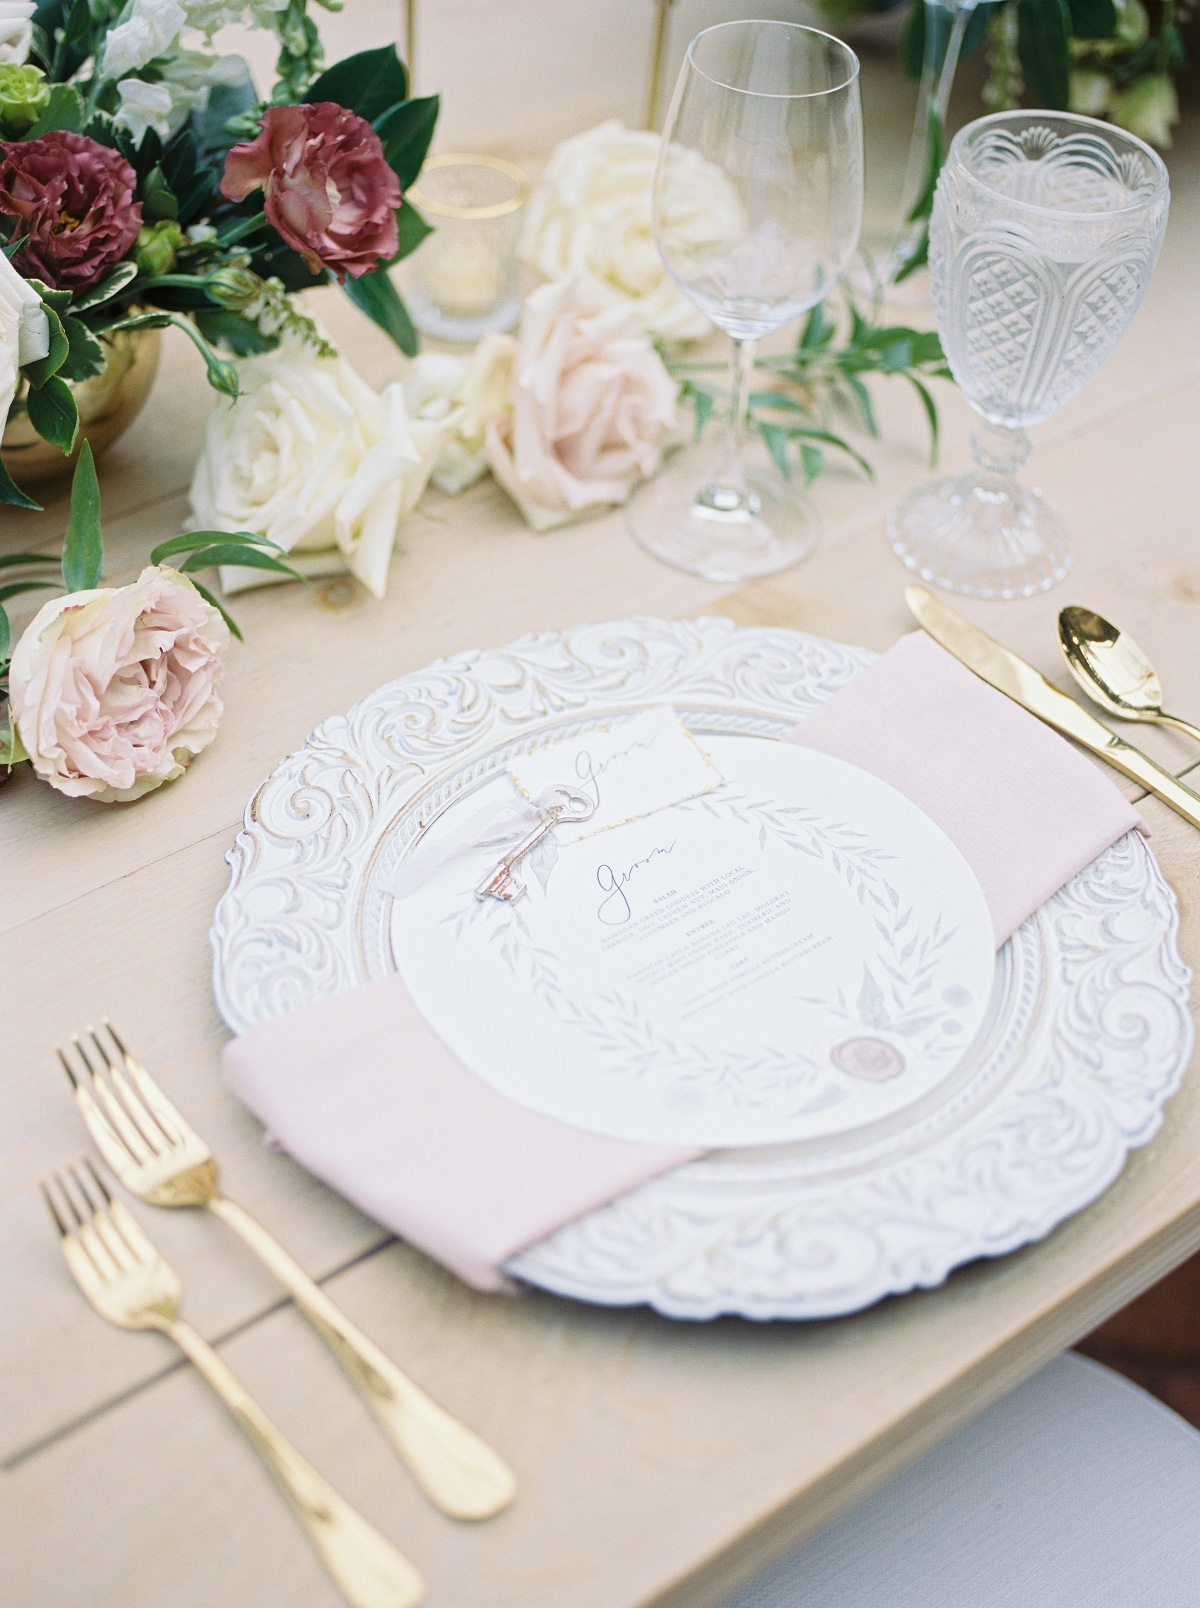 patterned plates for wedding place-settings